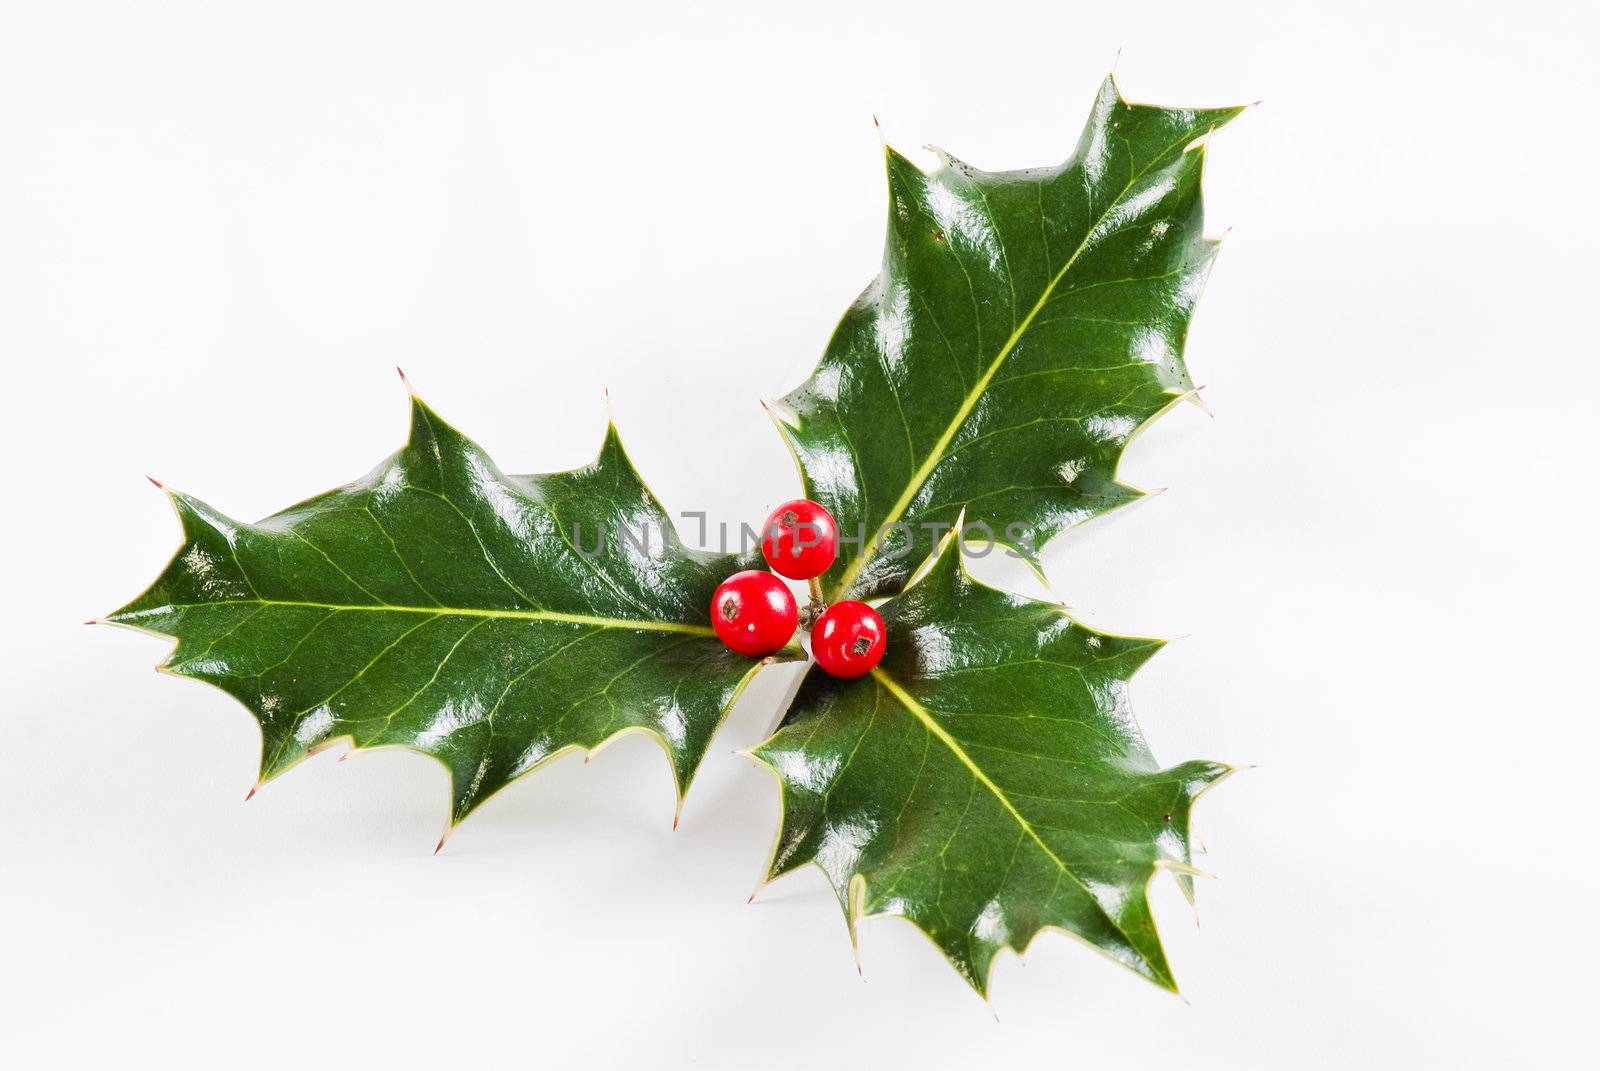 Holly leaf with red berries by caldix